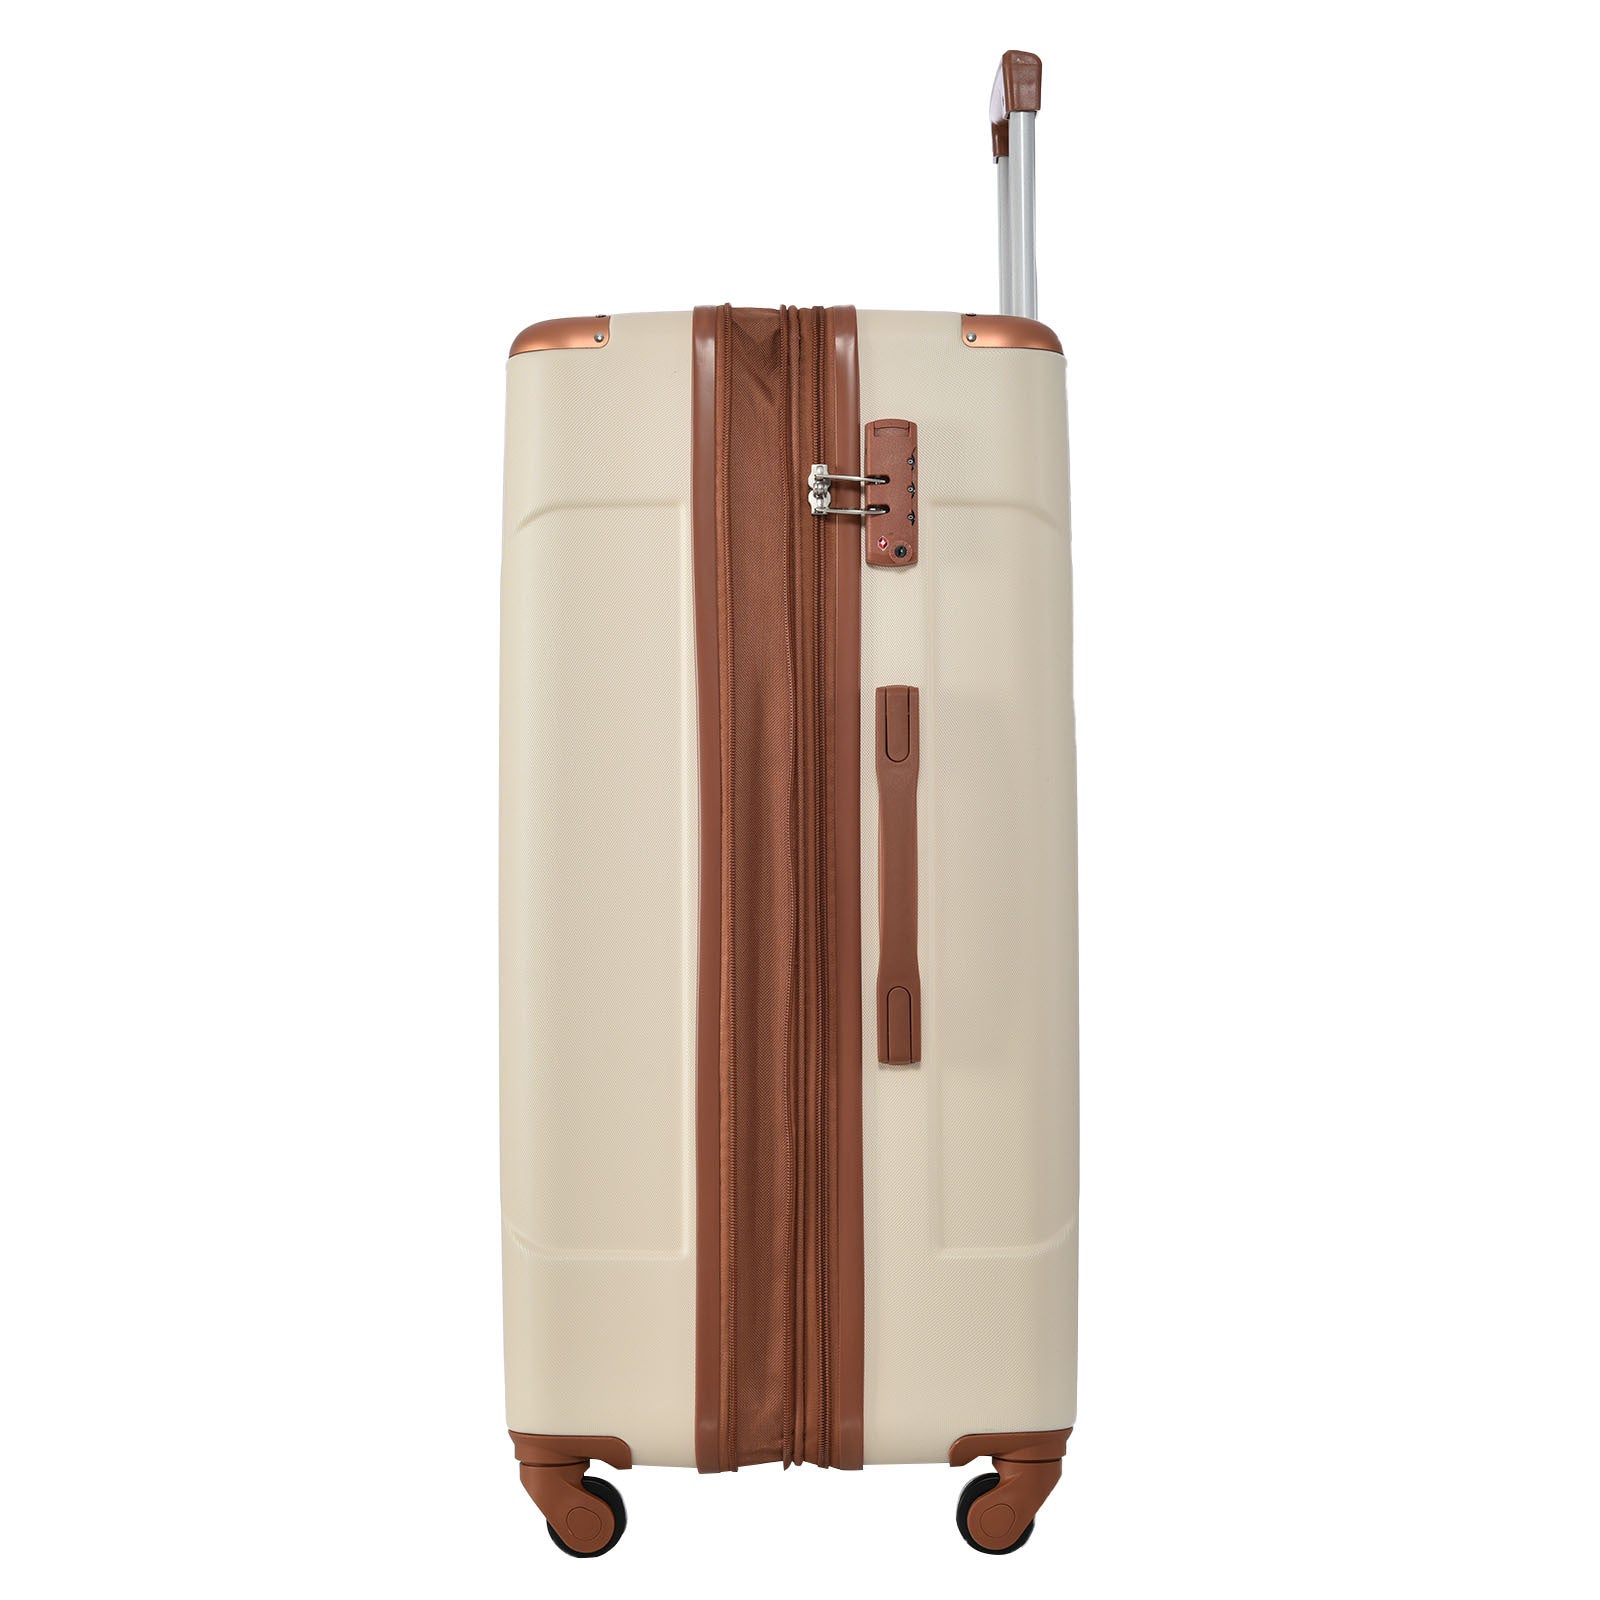 Hardside Luggage Sets 2 Piece Suitcase Set Expandable brown white-abs